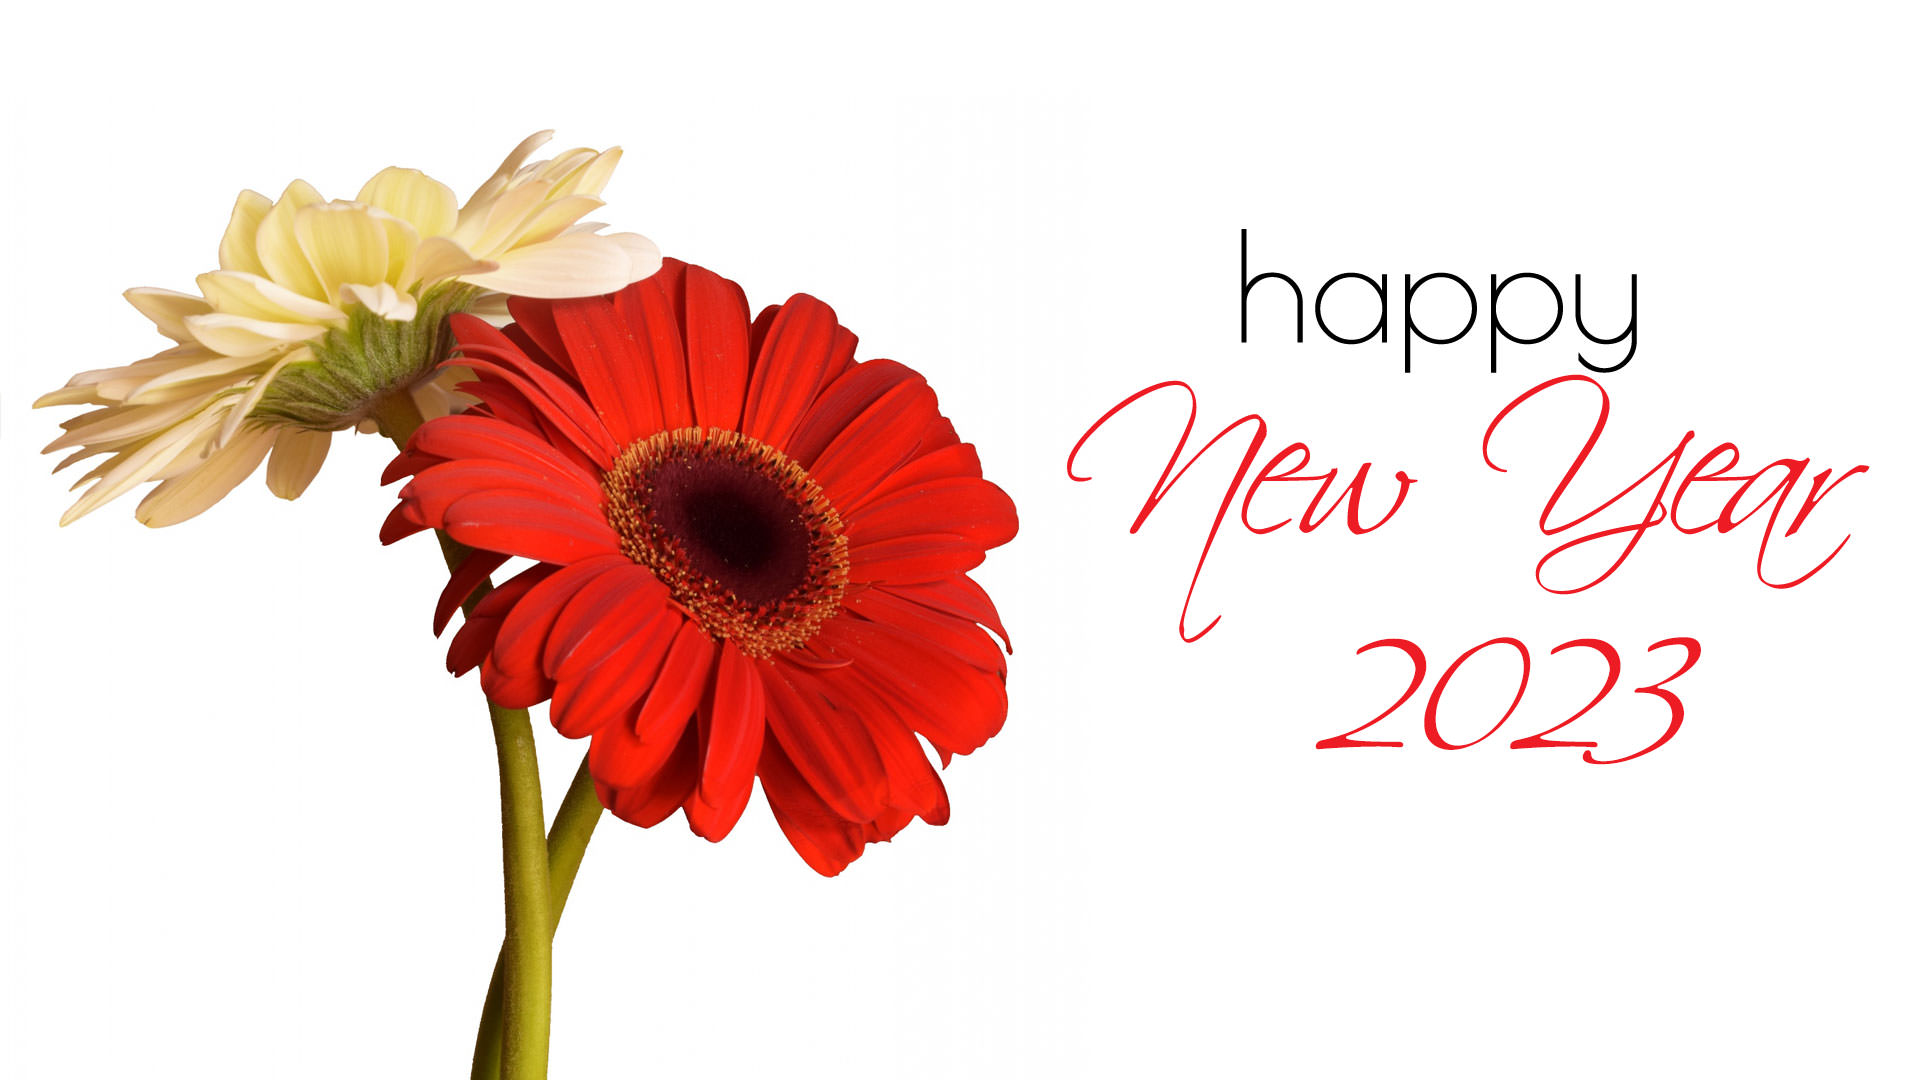 Simple New Year 2023 Greeting Wallpaper with Red and Yellow Flower